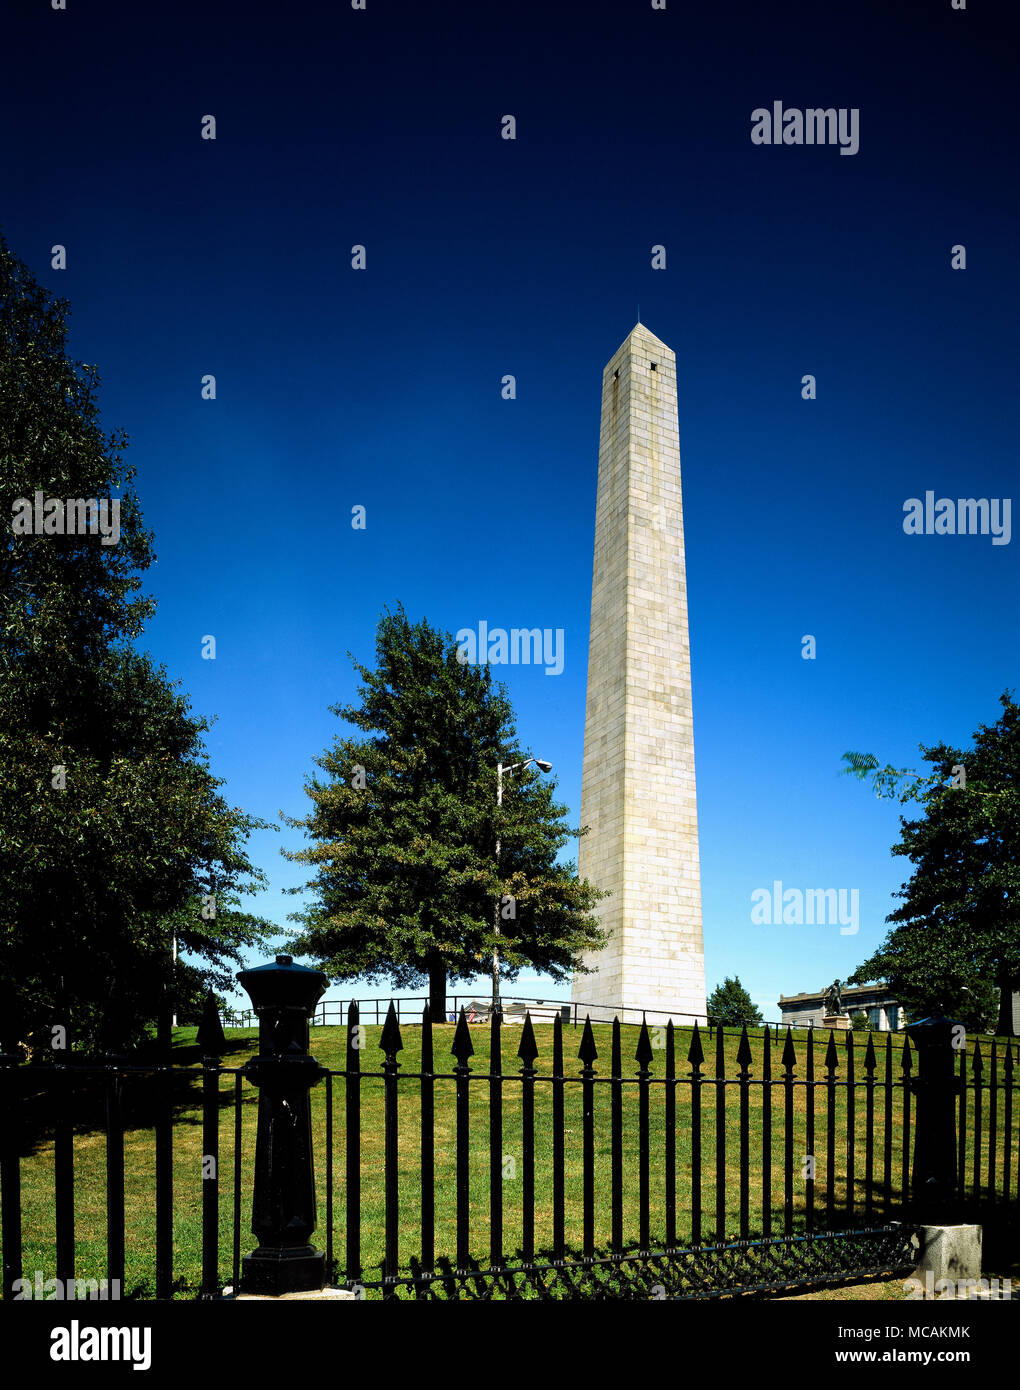 The Bunker Hill Monument is not on Bunker Hill but instead on Breed's Hill, where most of the fighting in the misnamed Battle of Bunker Hill actually took place. The Monument Association, which had purchased the battlefield site, was forced to sell off all but the hill's summit in order to complete the monument. Stock Photo